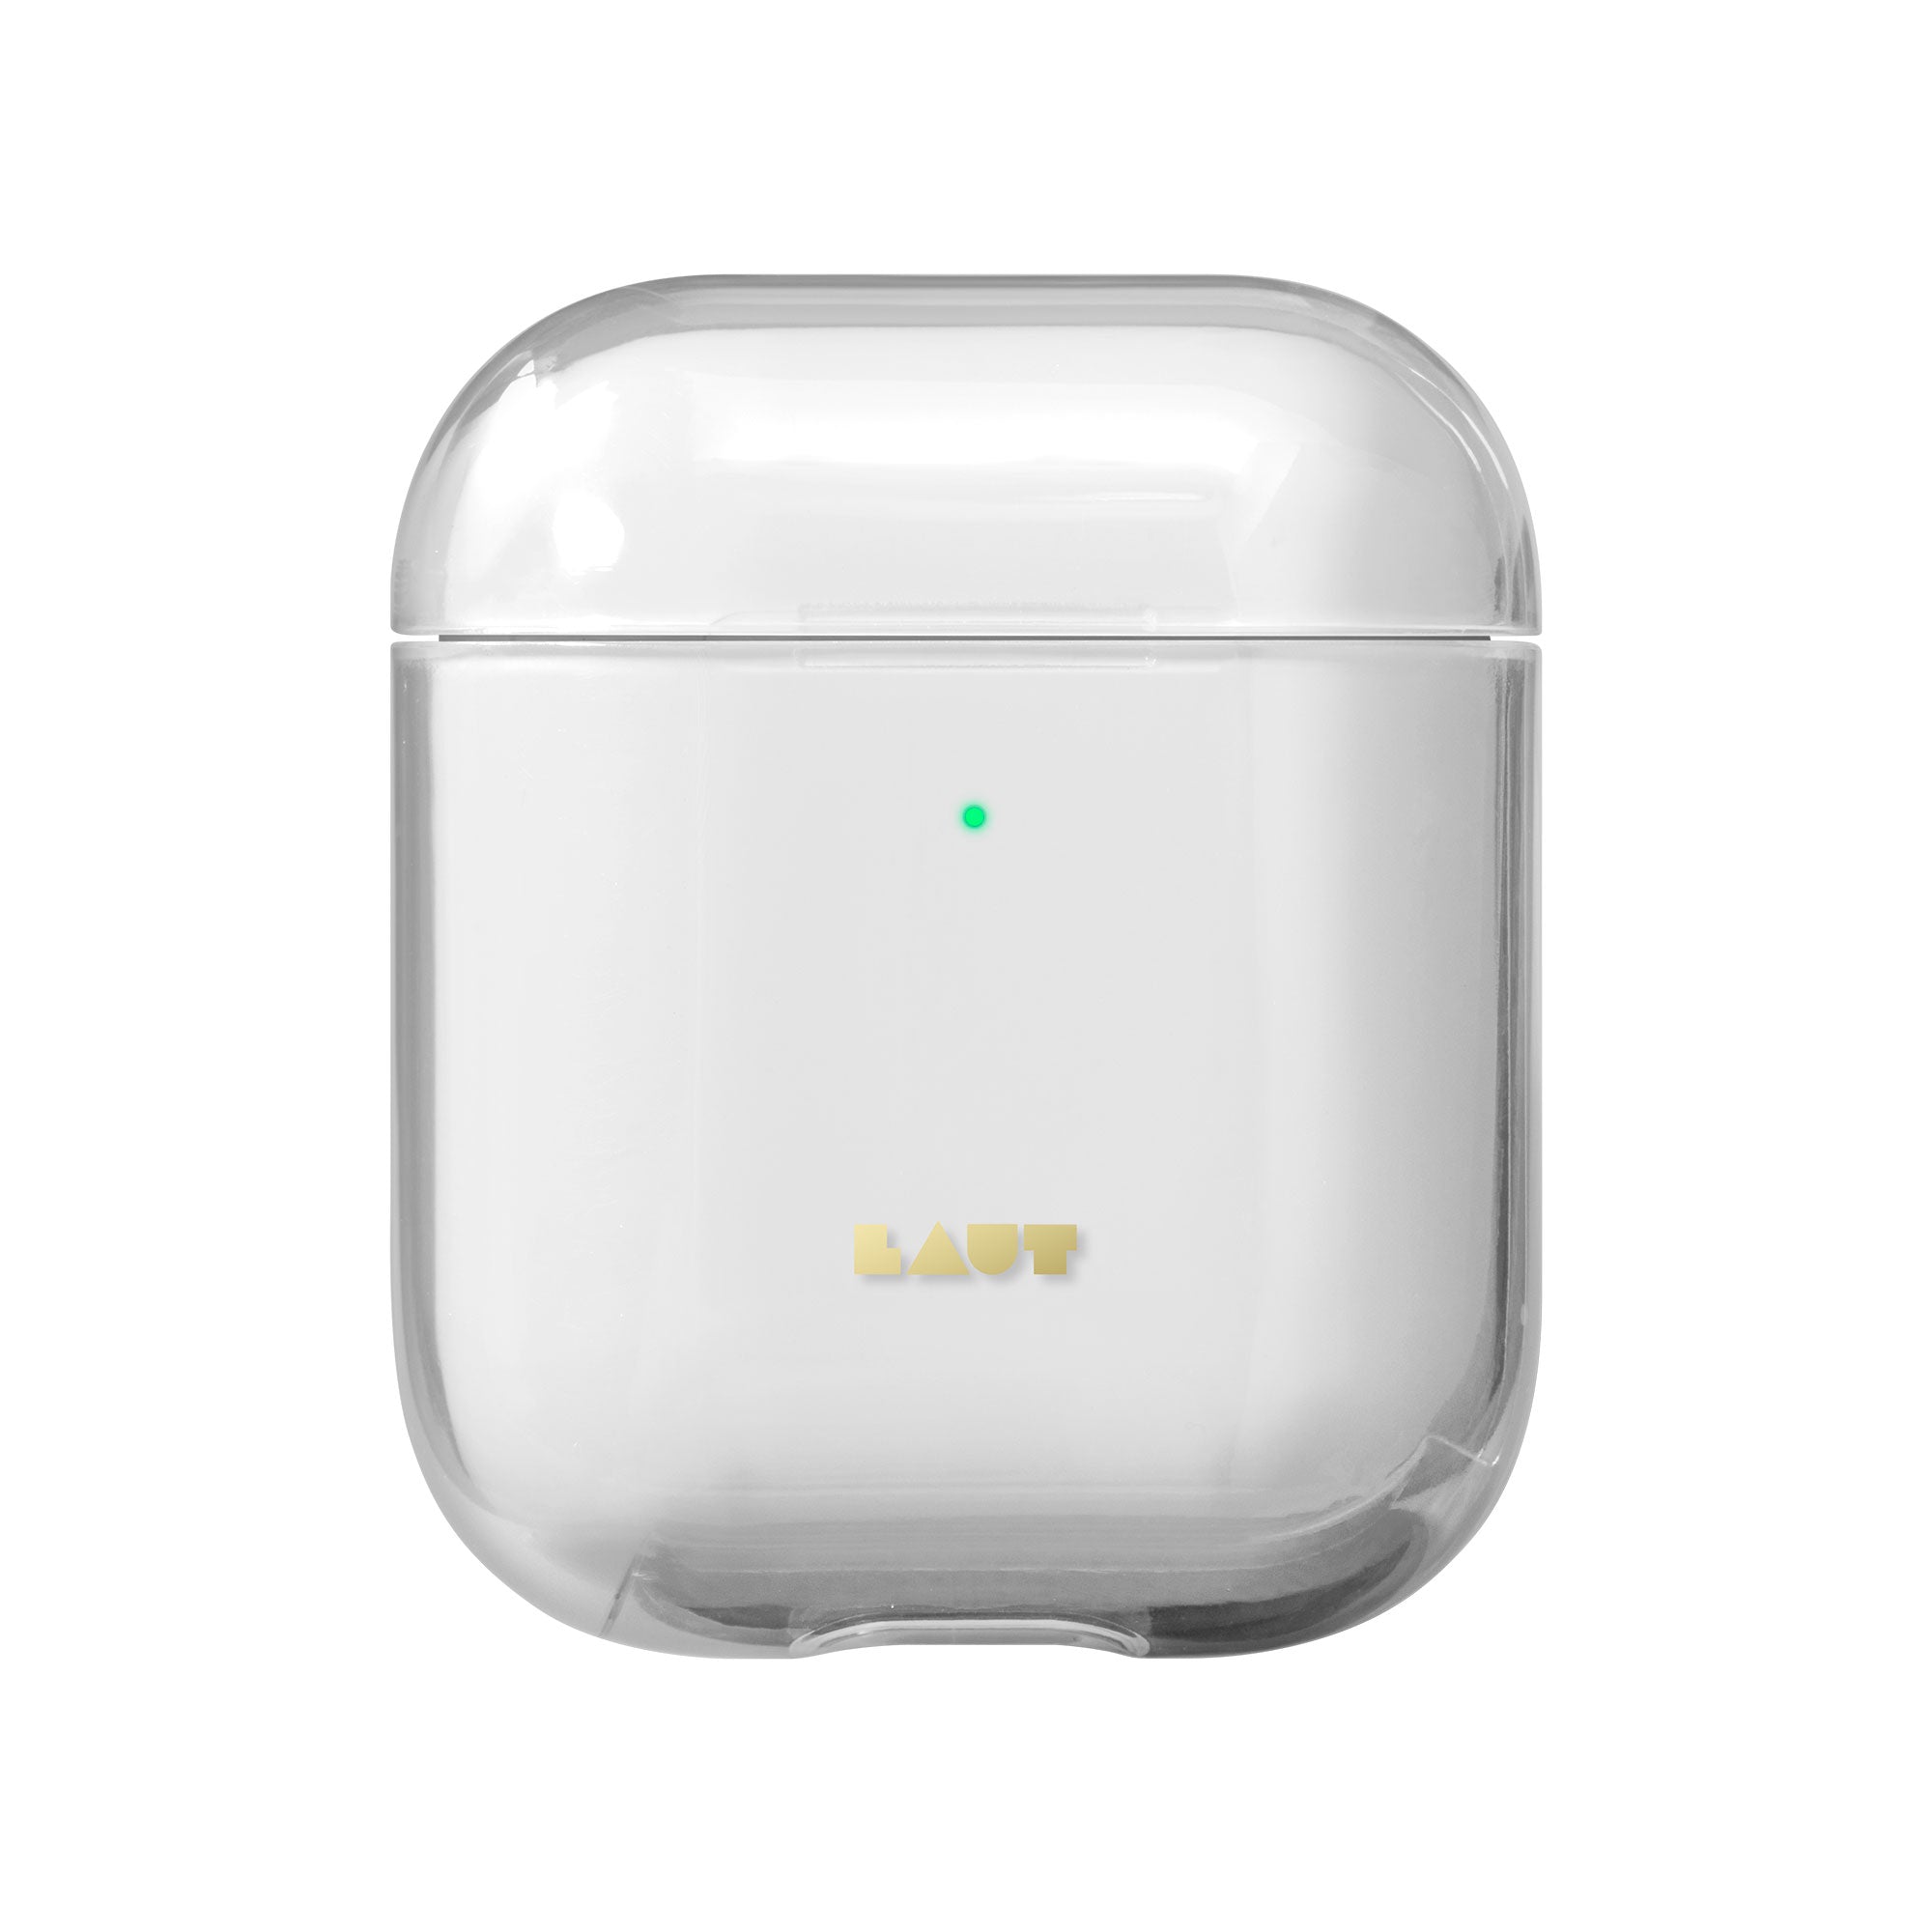 CRYSTAL-X for AirPods | Crystal Clear Design | Anti-scratch– LAUT ...